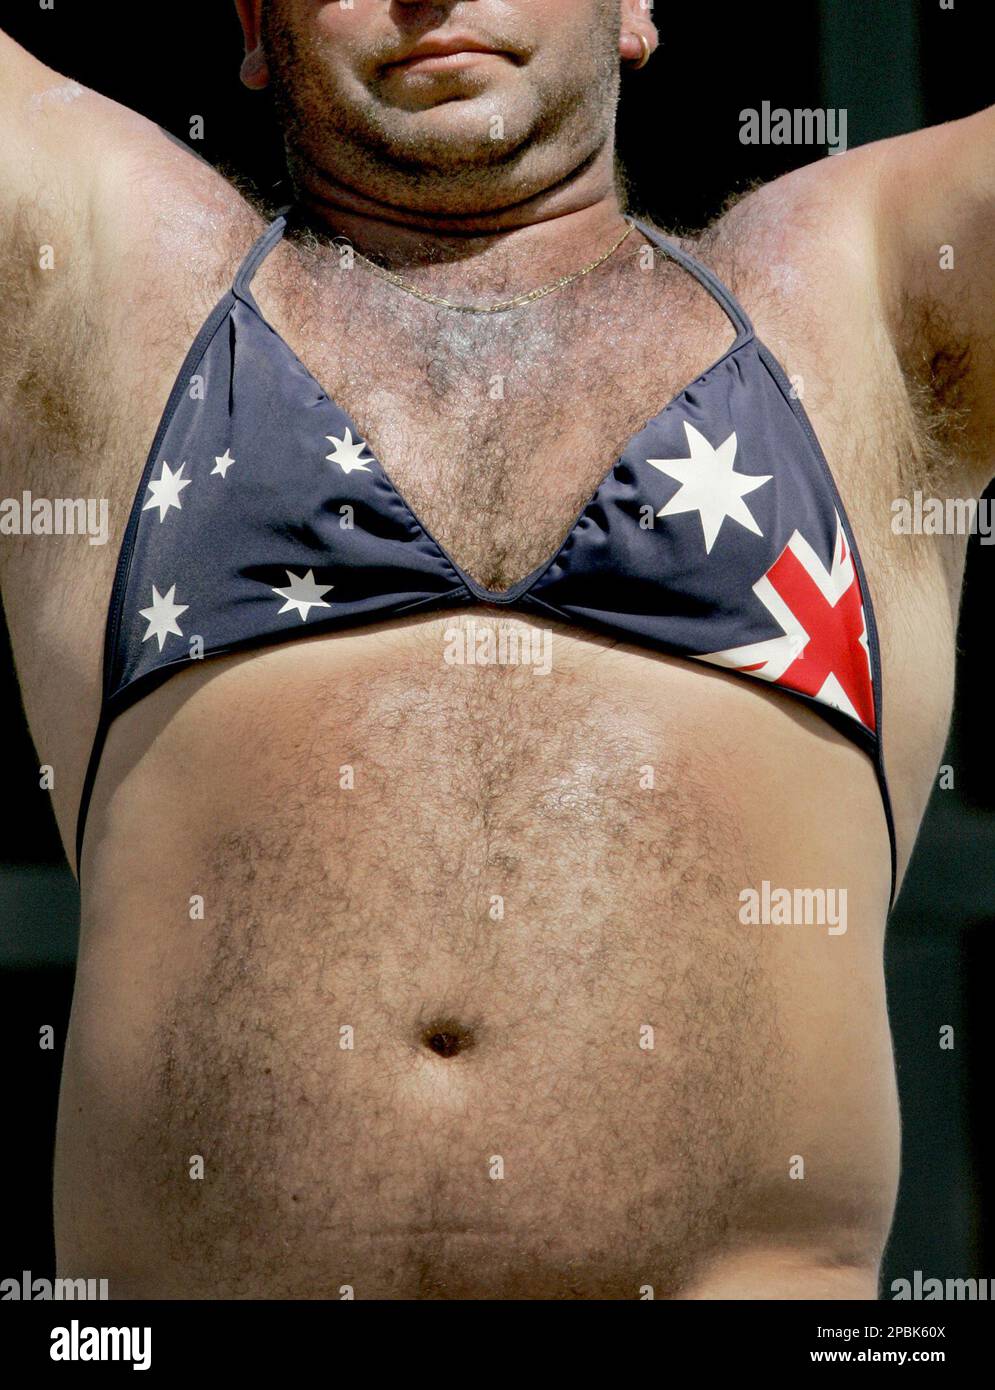 A fan wearing a bikini top with an Australian flag design is seen during  the Cricket World Cup semifinal match between Australia and South Africa at  the Beausejour Cricket Ground in Gros